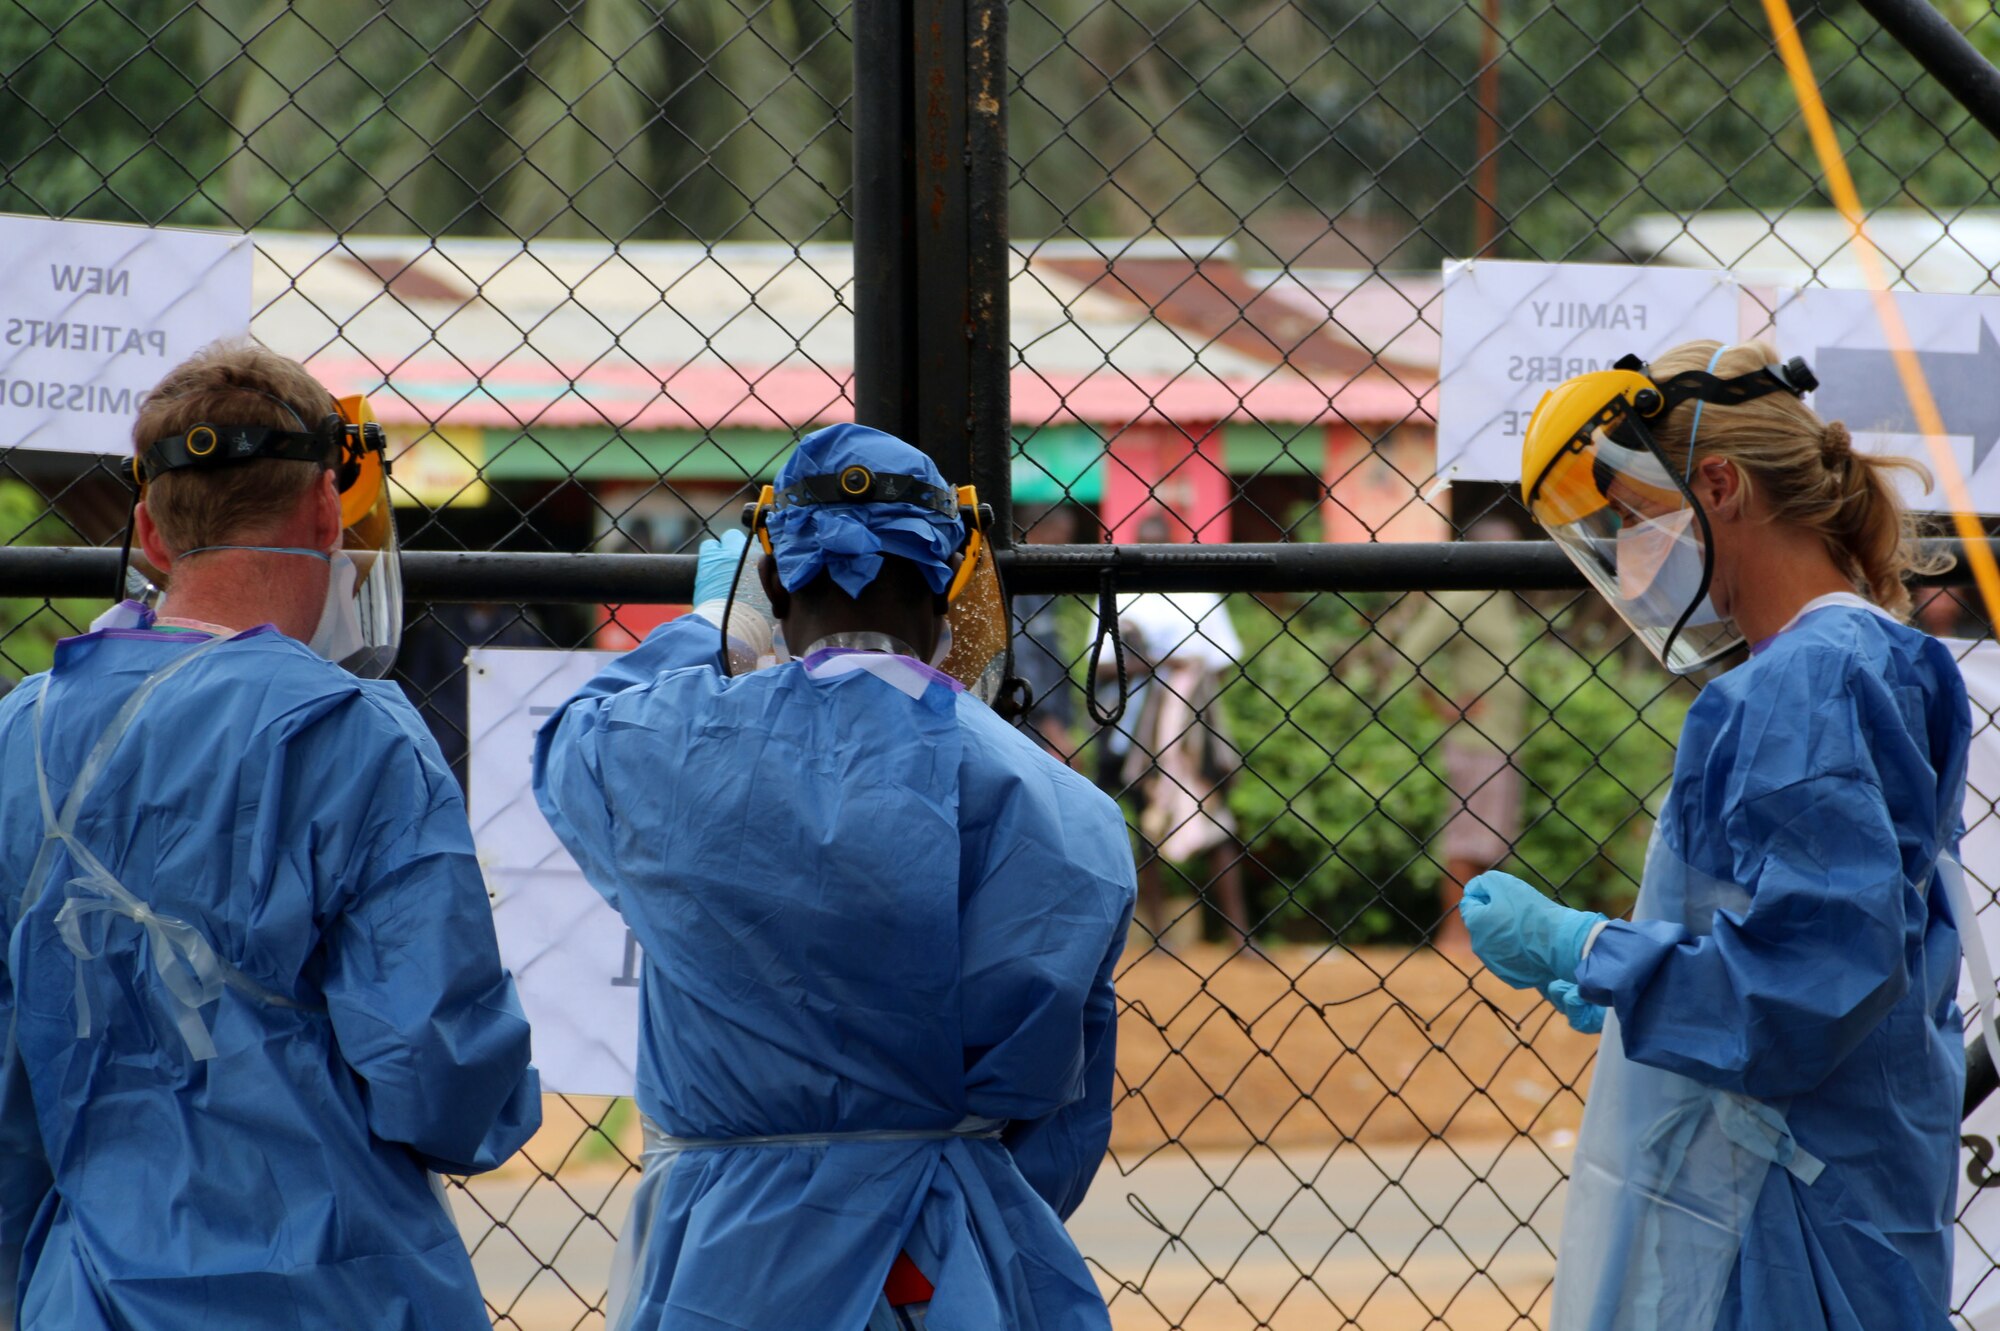 MONROVIA, Liberia – A group of health care workers hang signs on a fence at a field hospital in Monrovia, Liberia Sept. 19, 2014. The workers are among volunteers from around the world fighting the epidemic outbreak of Ebola. (Photo/Maj. Francis Obuseh)